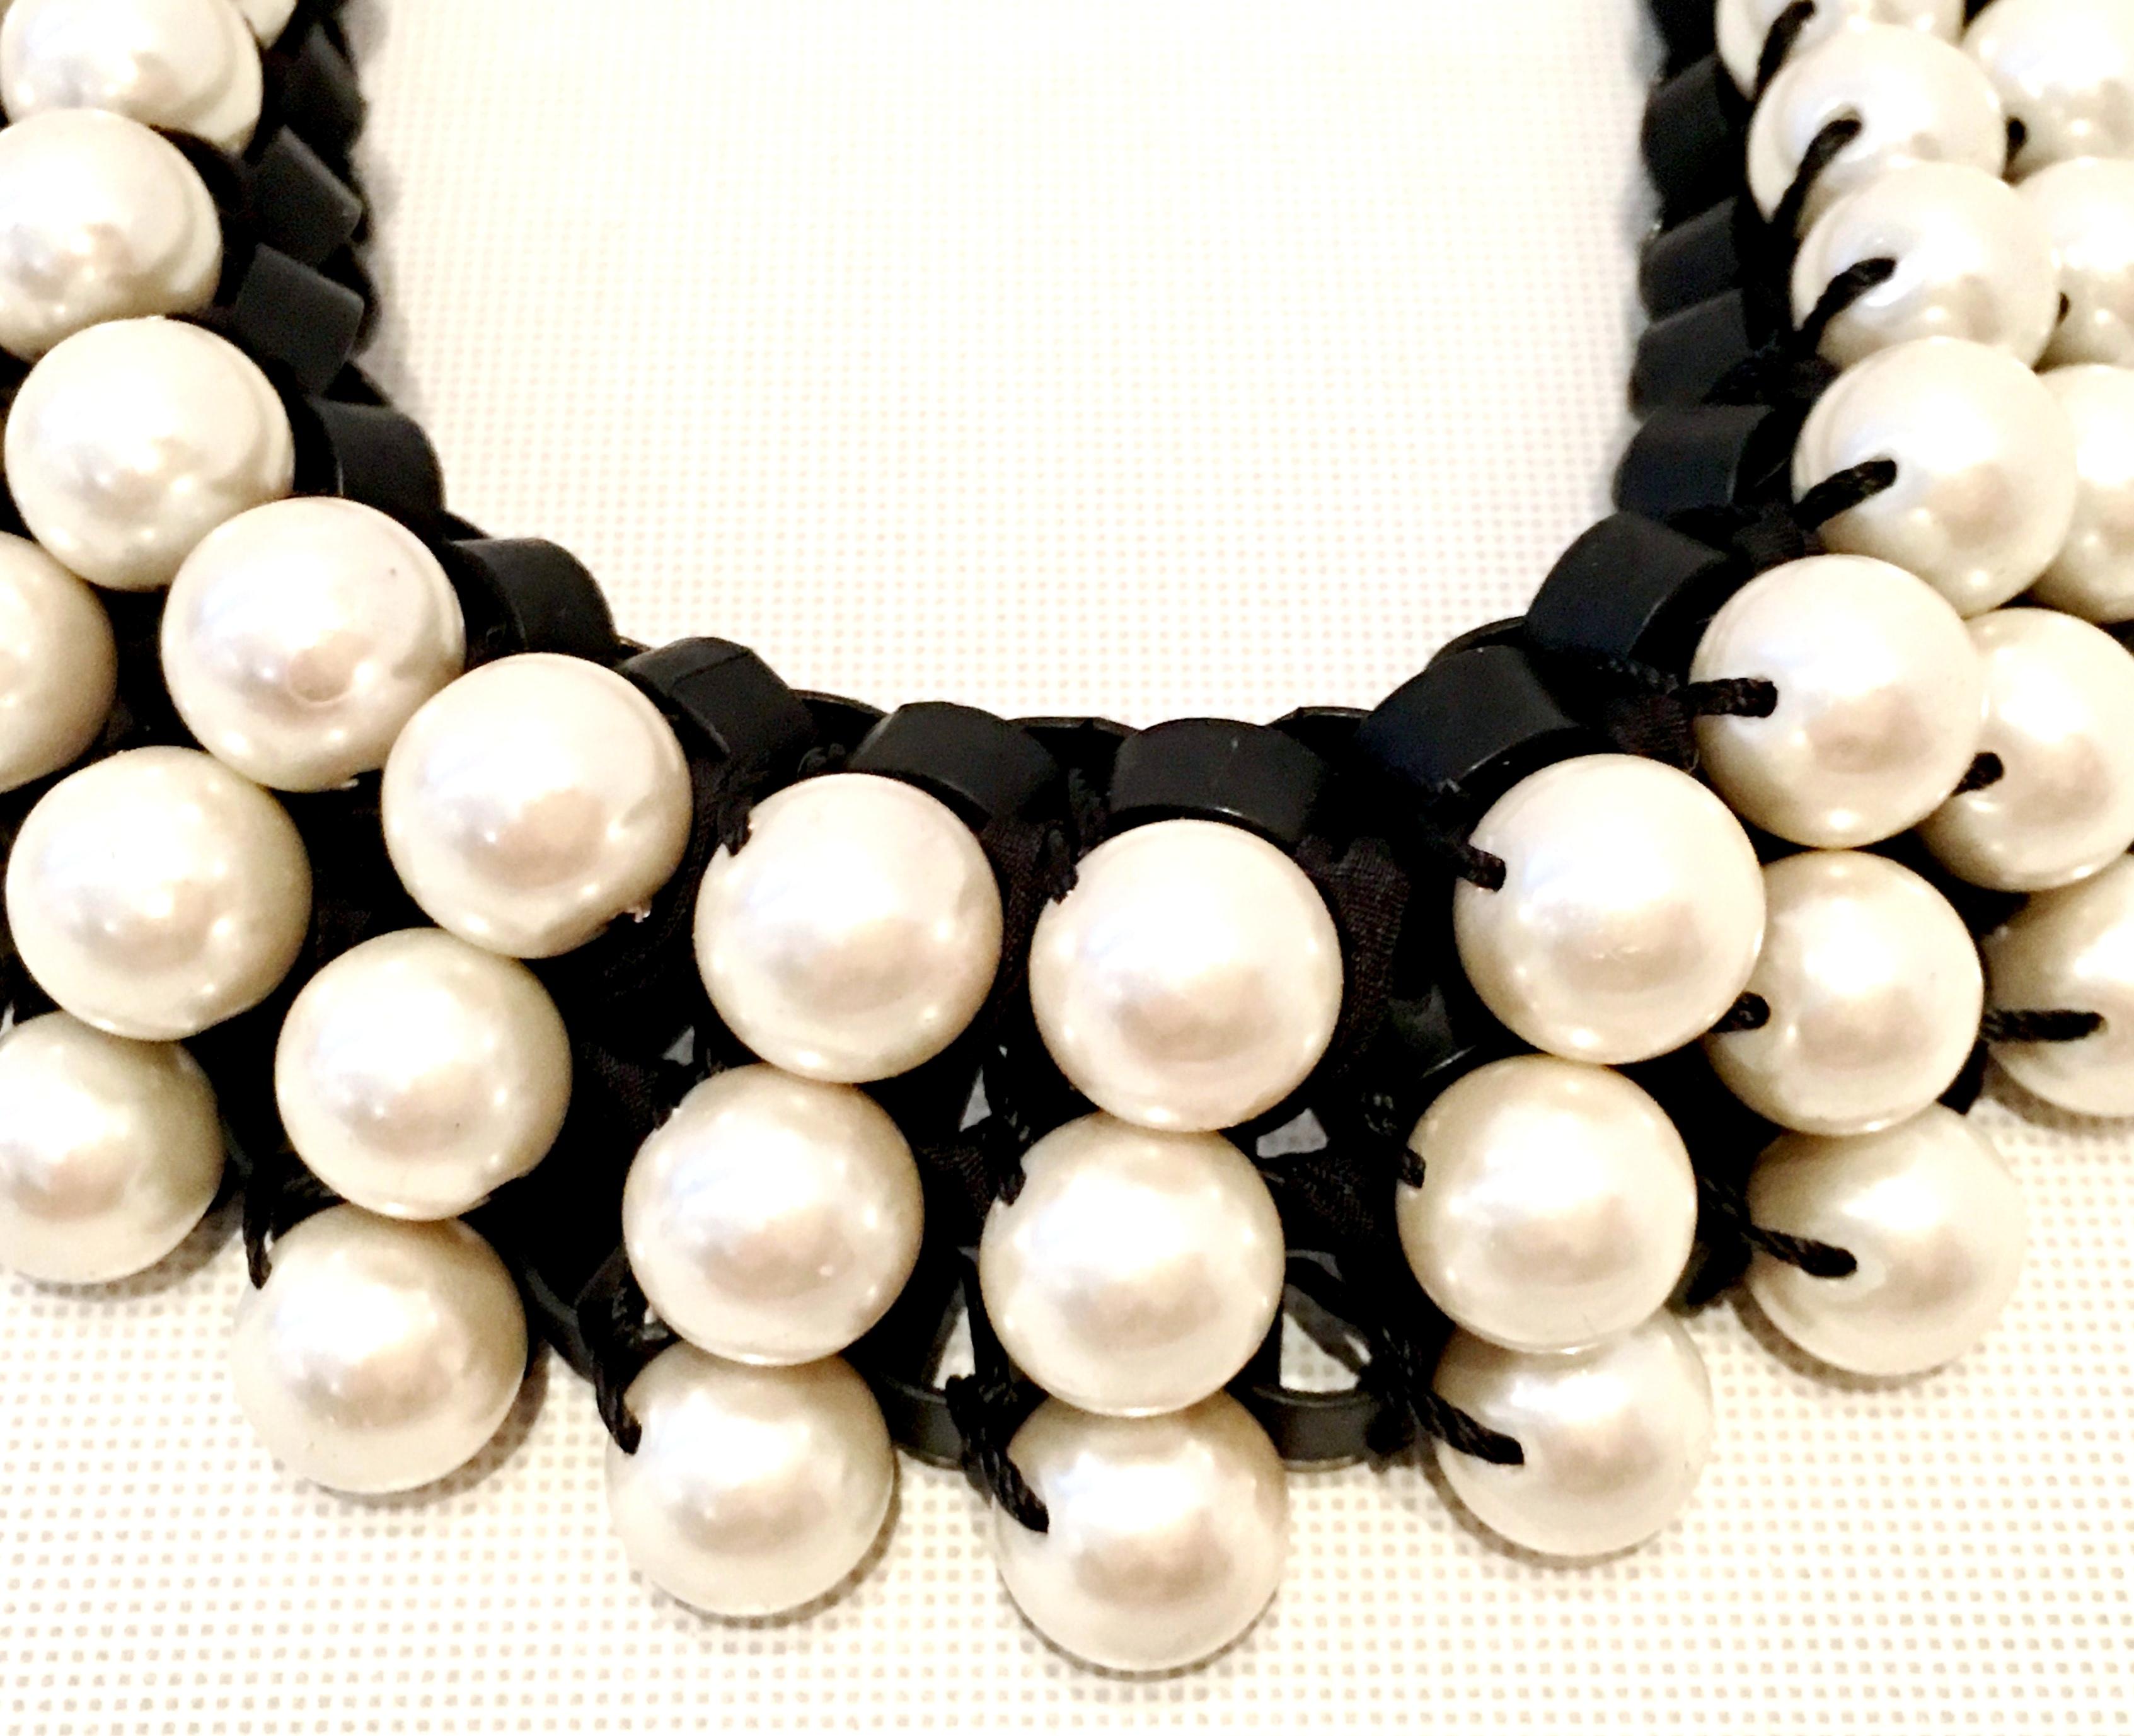 Women's or Men's 21st Century Leather & Faux Pearl Choker Style Necklace By, Lee Angel